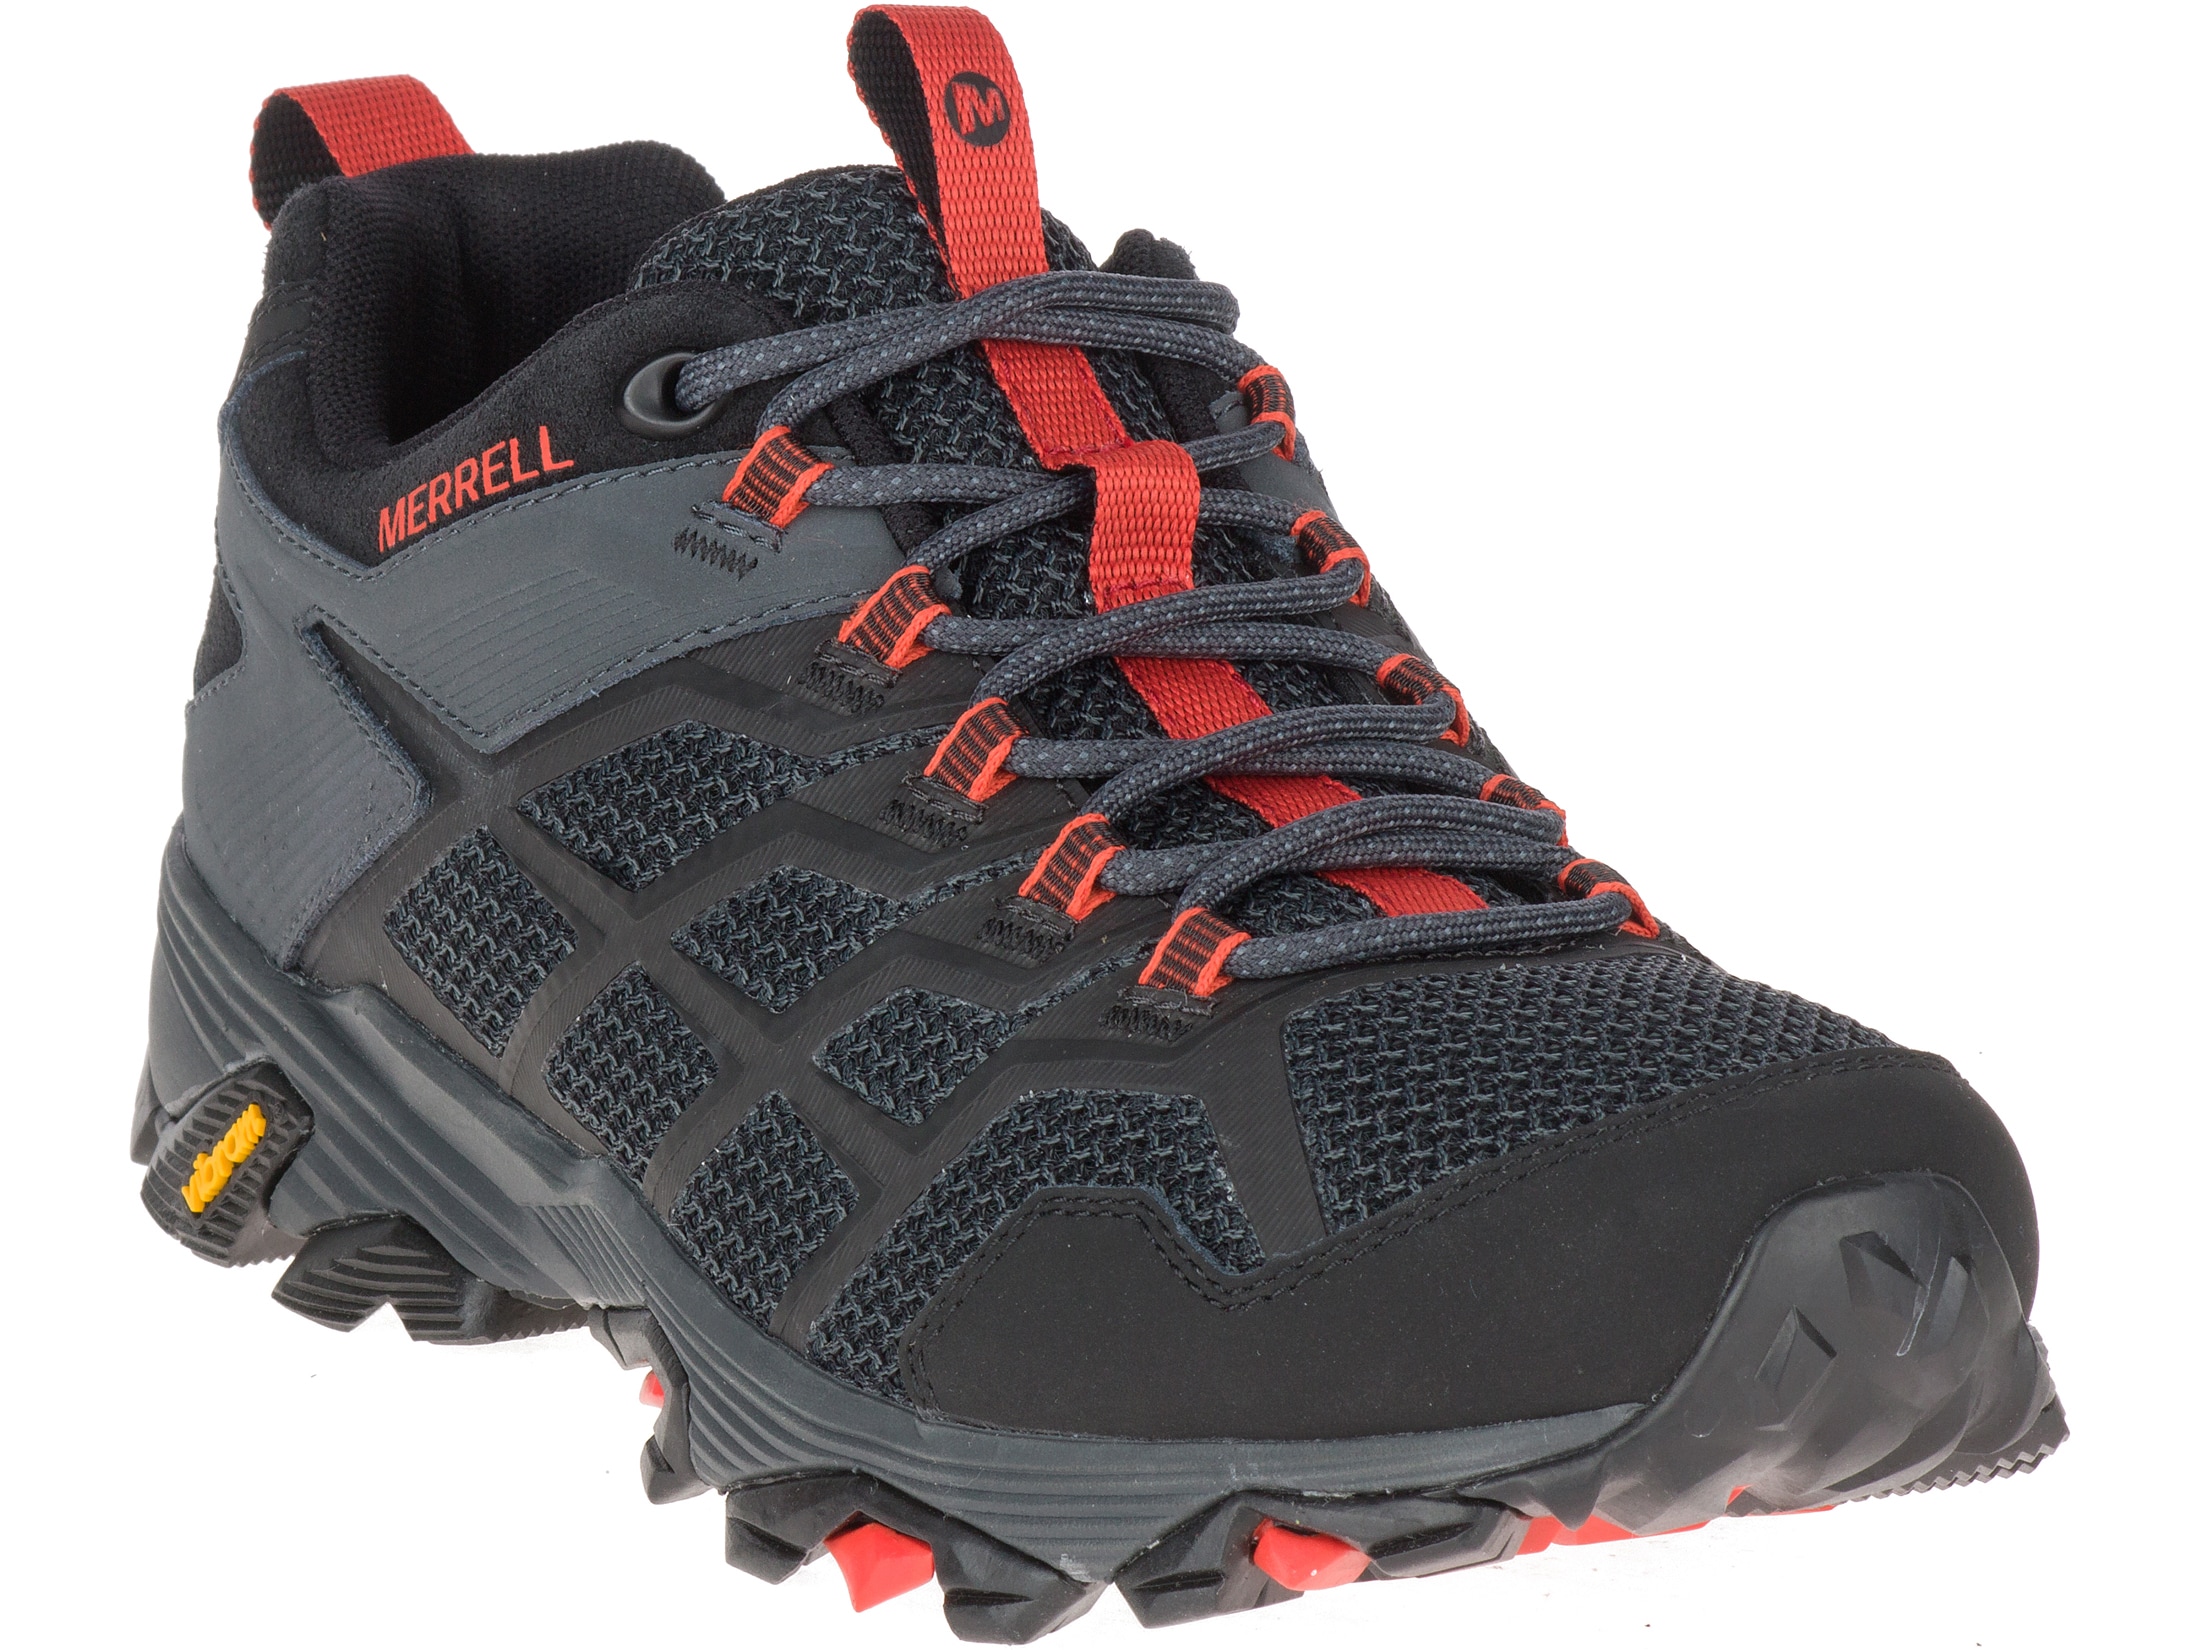 Merrell Moab FST 2 4 Hiking Shoes Leather/Synthetic Black/Granite